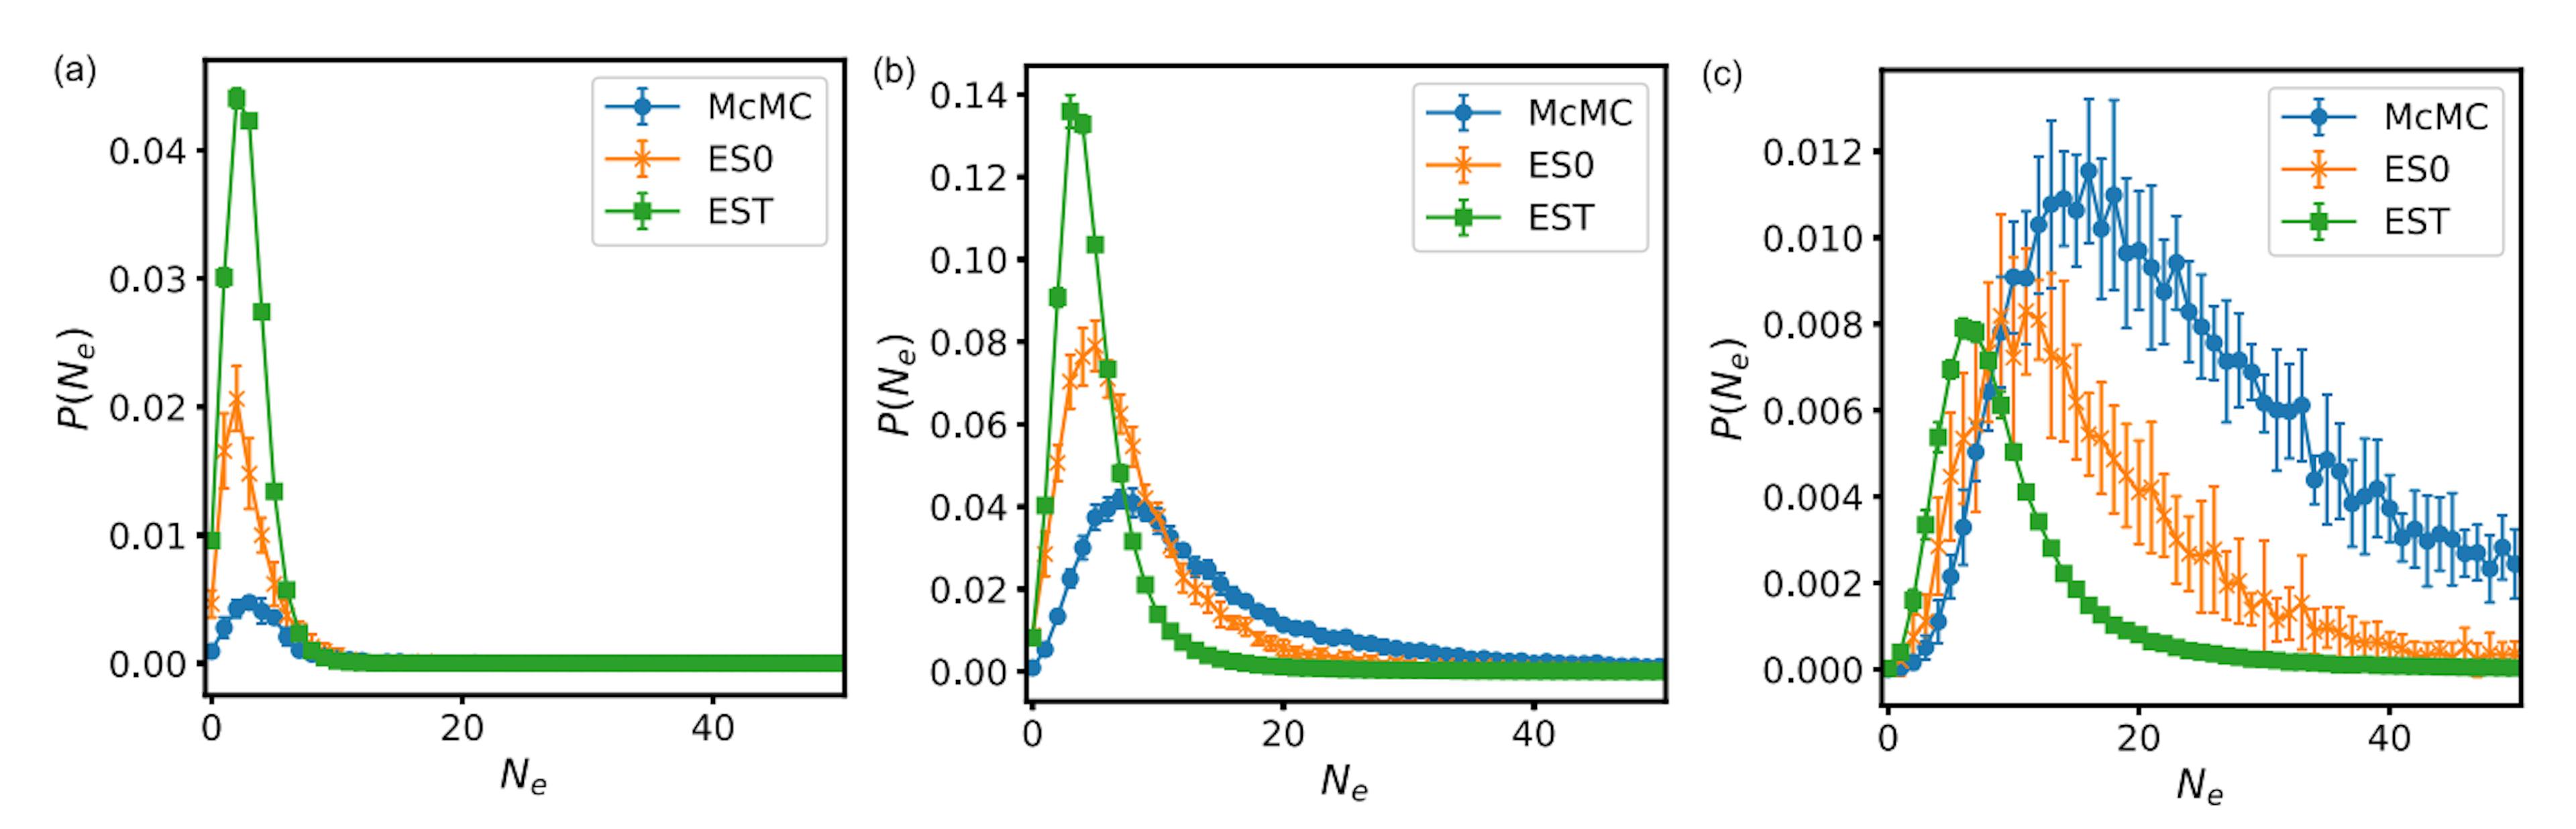 FIG. 7. The number distribution of the essential edges for three phenotypes obtained by McMC, ES0, and EST. (a) monostable(b) the toggle switches (c) the one-way switches. The circles, the slanted crosses, and the squares indicate McMC, ES0, and